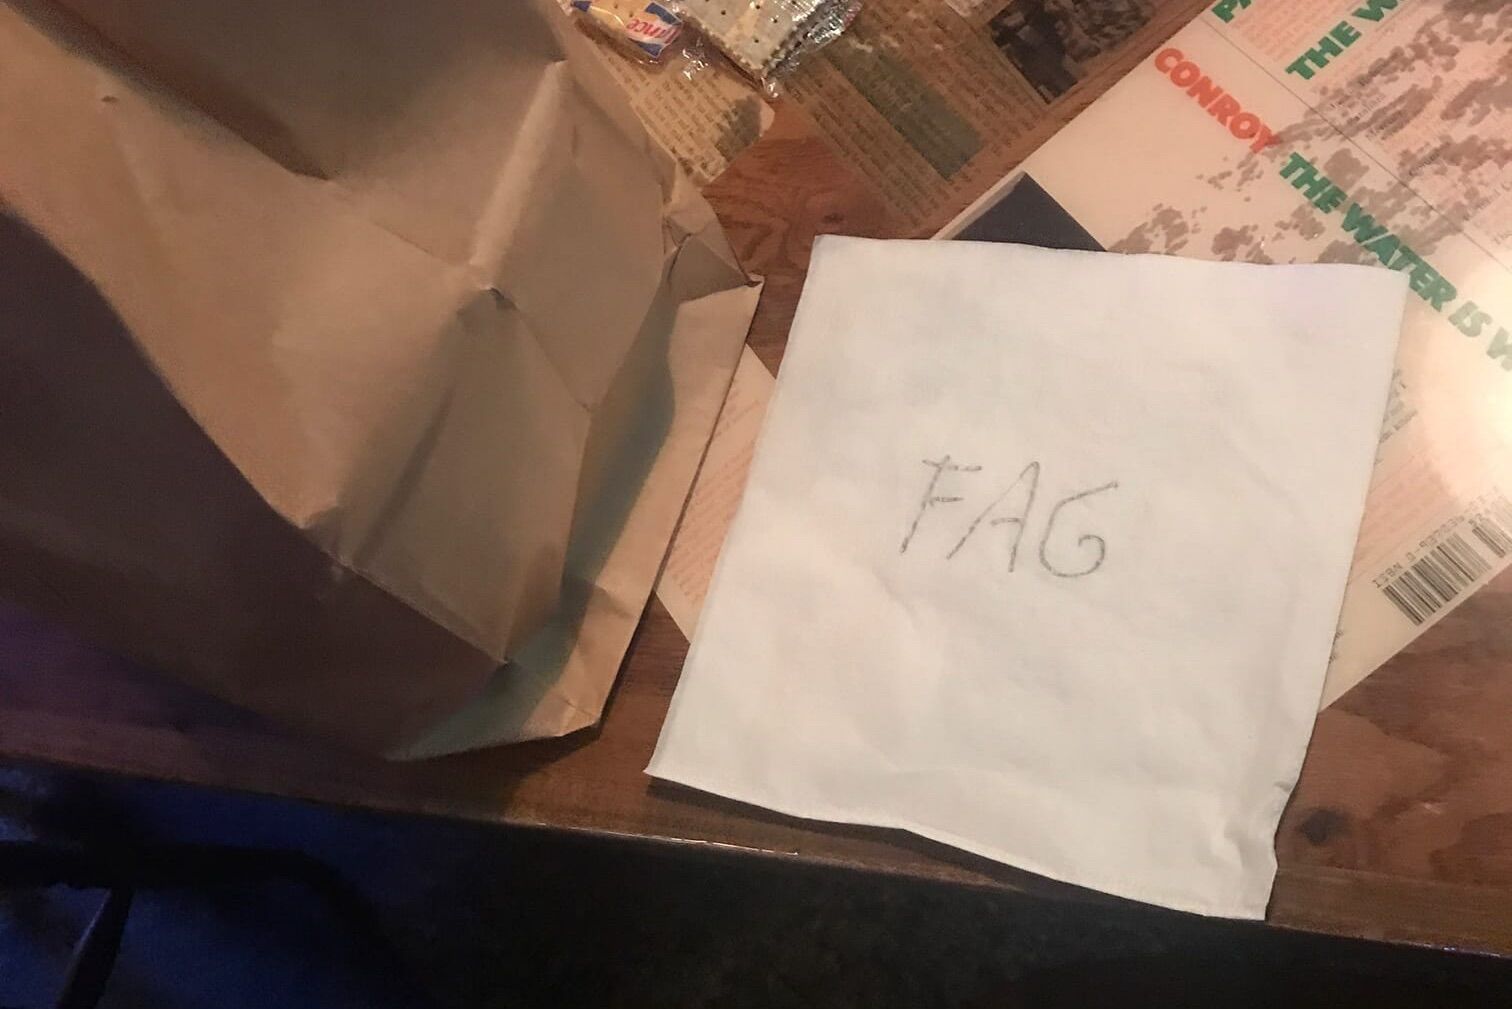 Cyntrell Jones Legette's friend found this note in his bag of takeout food from a South Carolina restaurant.